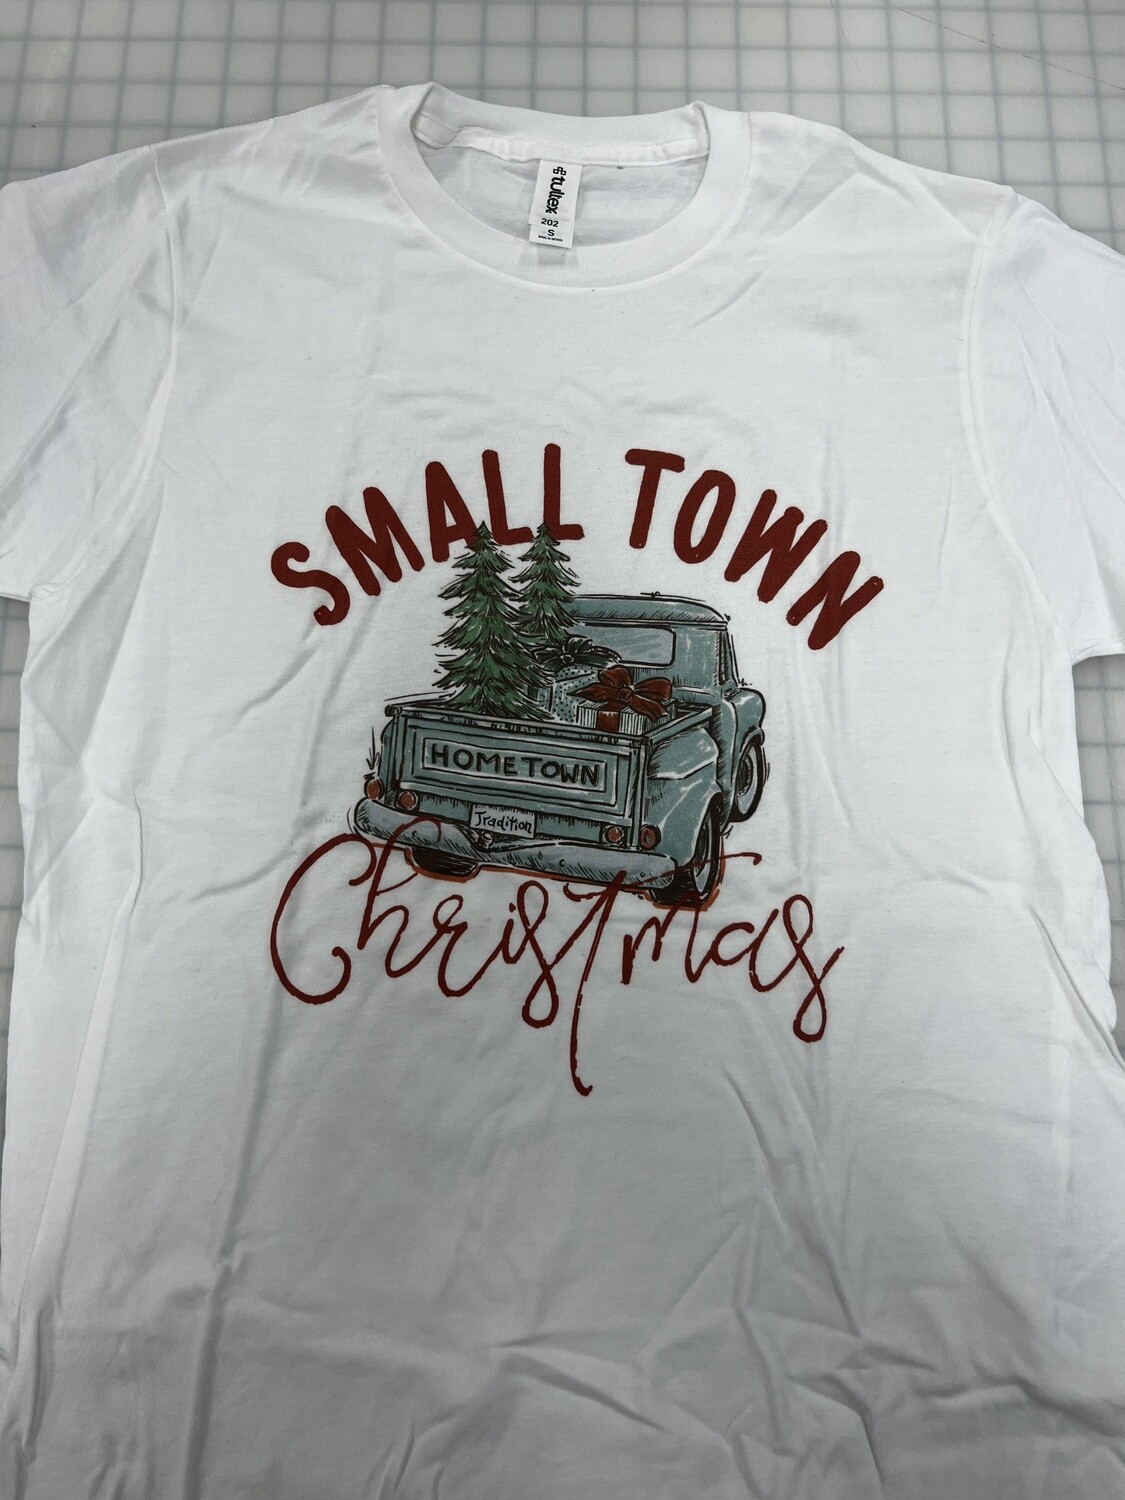 (S) Small Town Christmas - Short Sleeve White